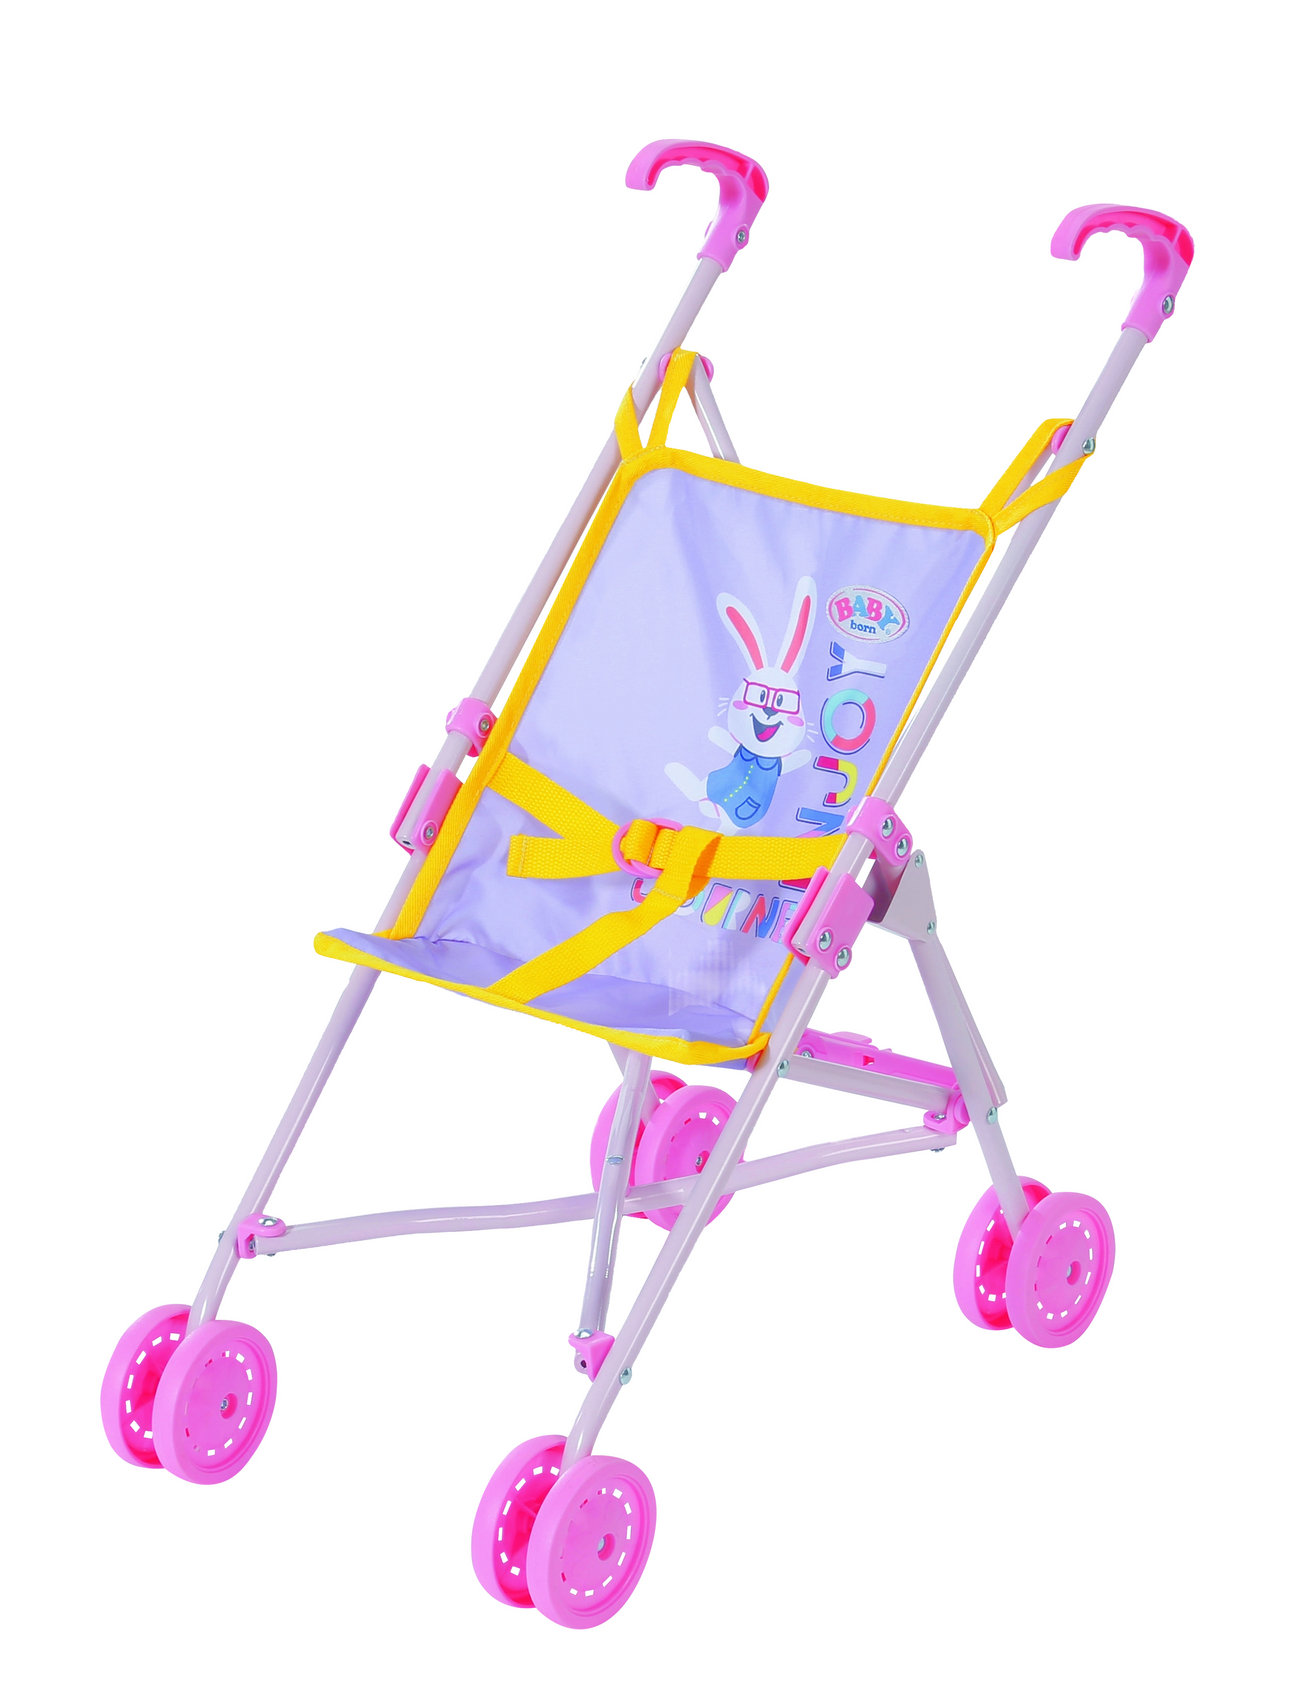 Baby Born Stroller Toys Dolls & Accessories Doll Trolleys Multi/patterned BABY Born